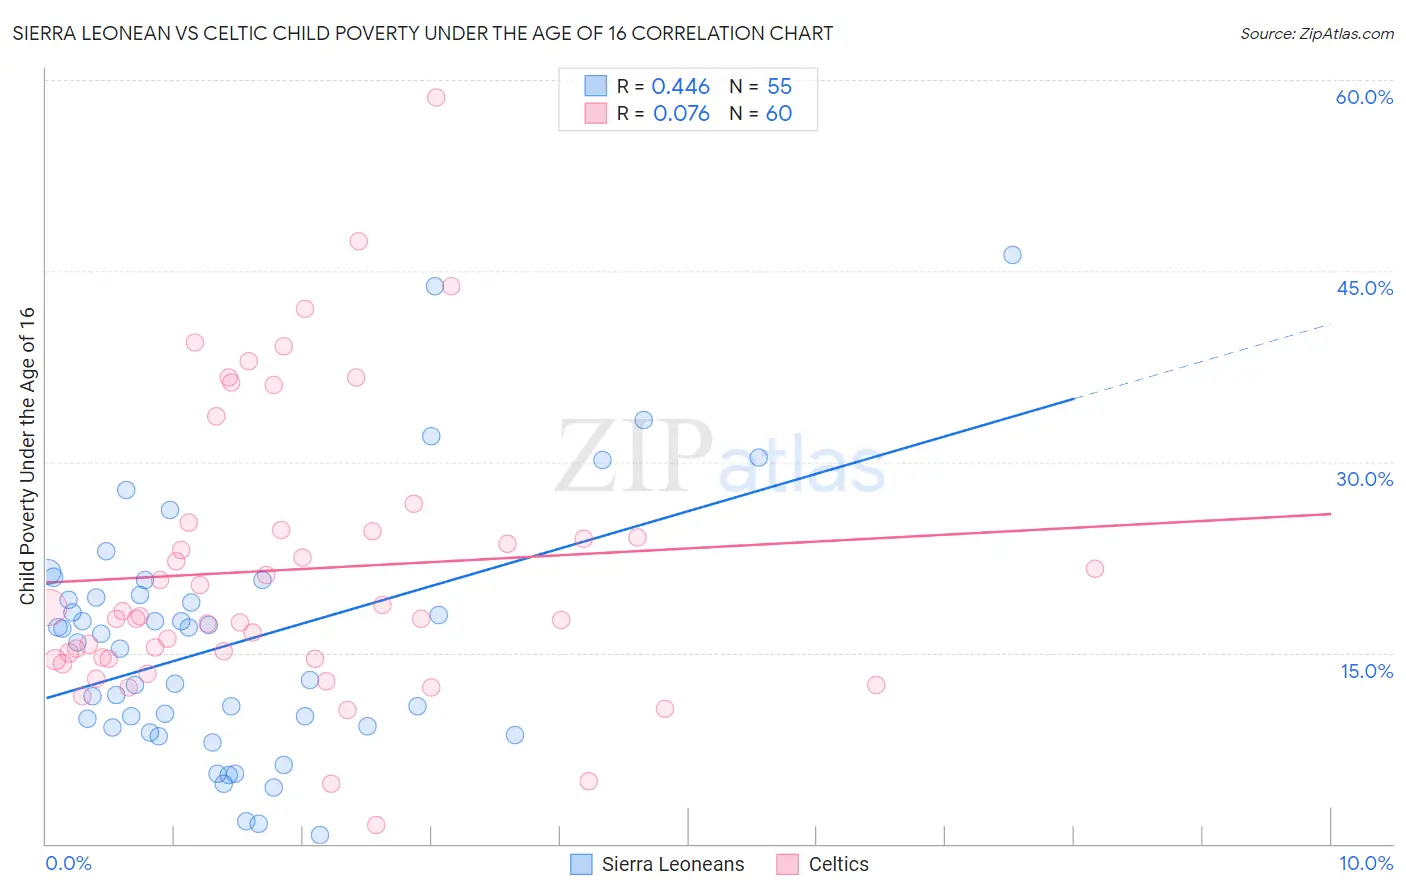 Sierra Leonean vs Celtic Child Poverty Under the Age of 16